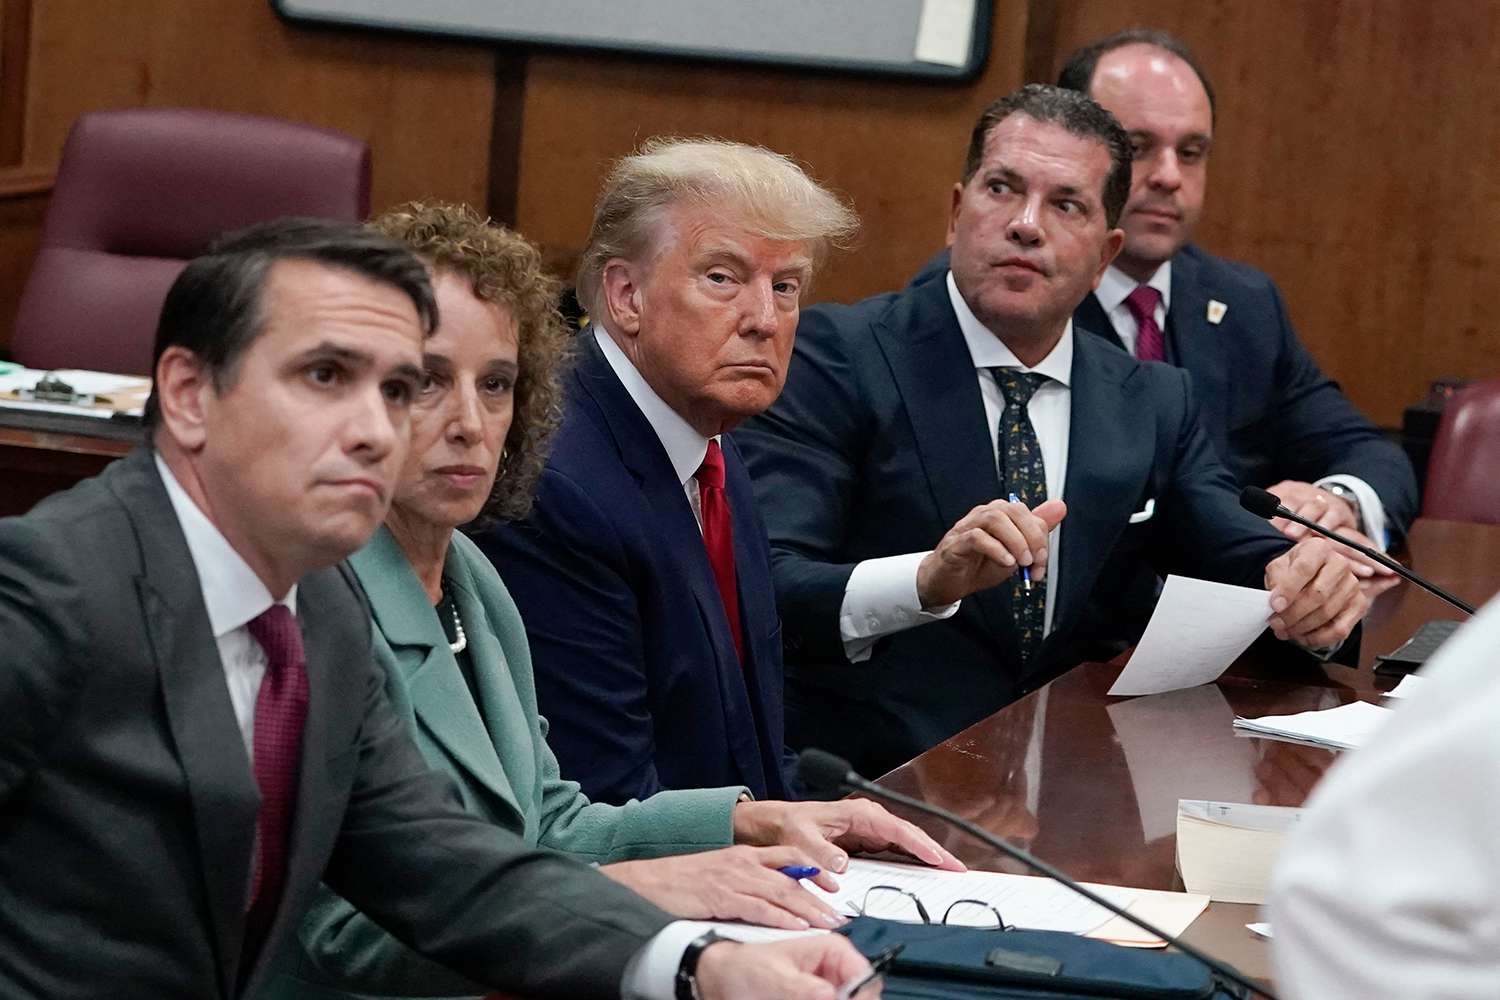 Former US president Donald Trump appears in court at the Manhattan Criminal Court in New York on April 4, 2023. From left: Todd Blanche, Susan Necheles, Donald Trump, Joseph Tacopina and Boris Epshteyn